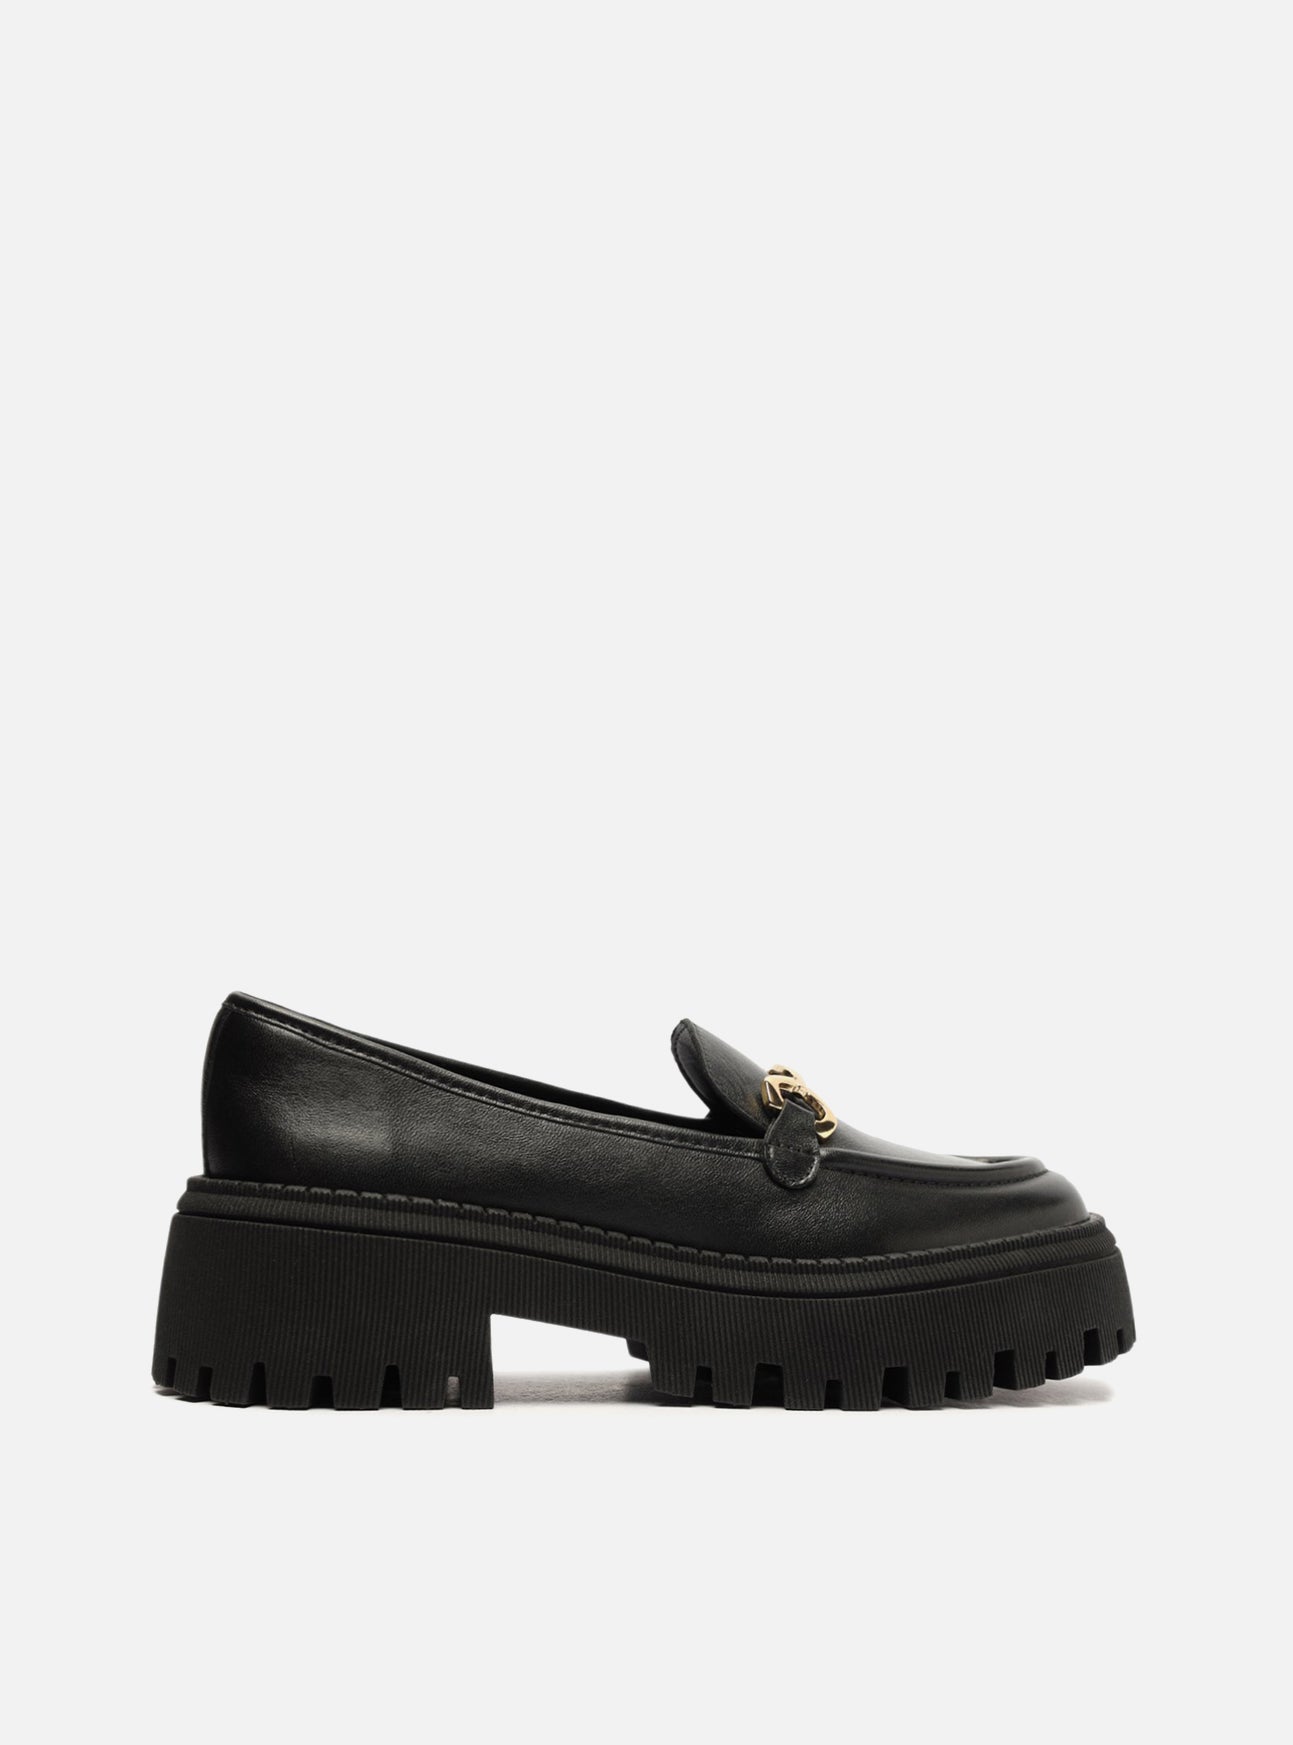 Ariana Loafer